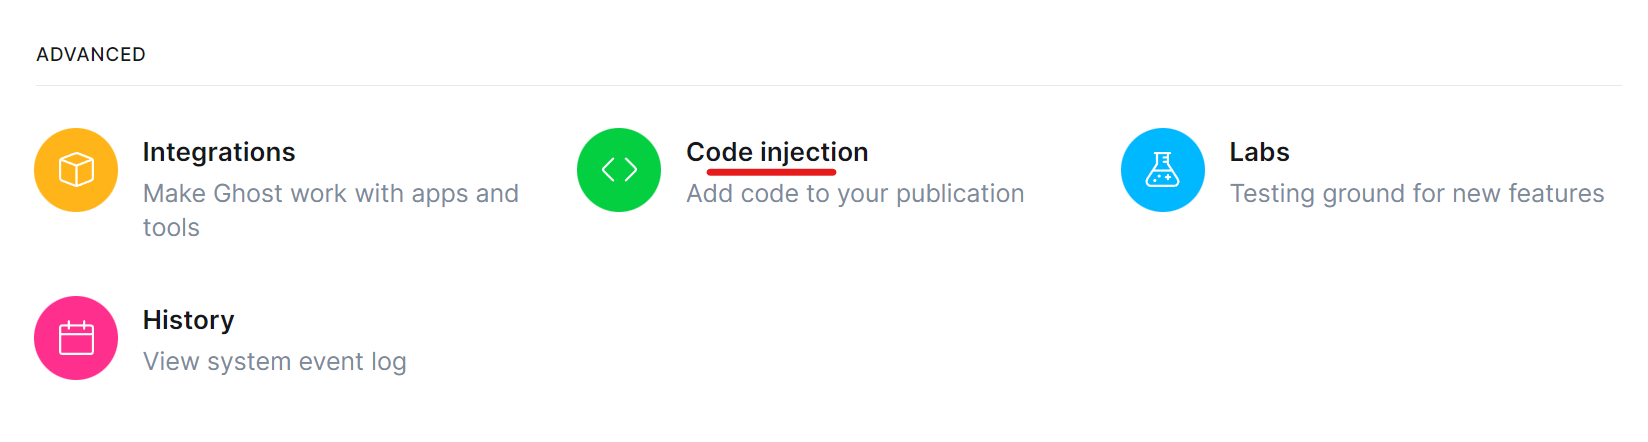 Code injection